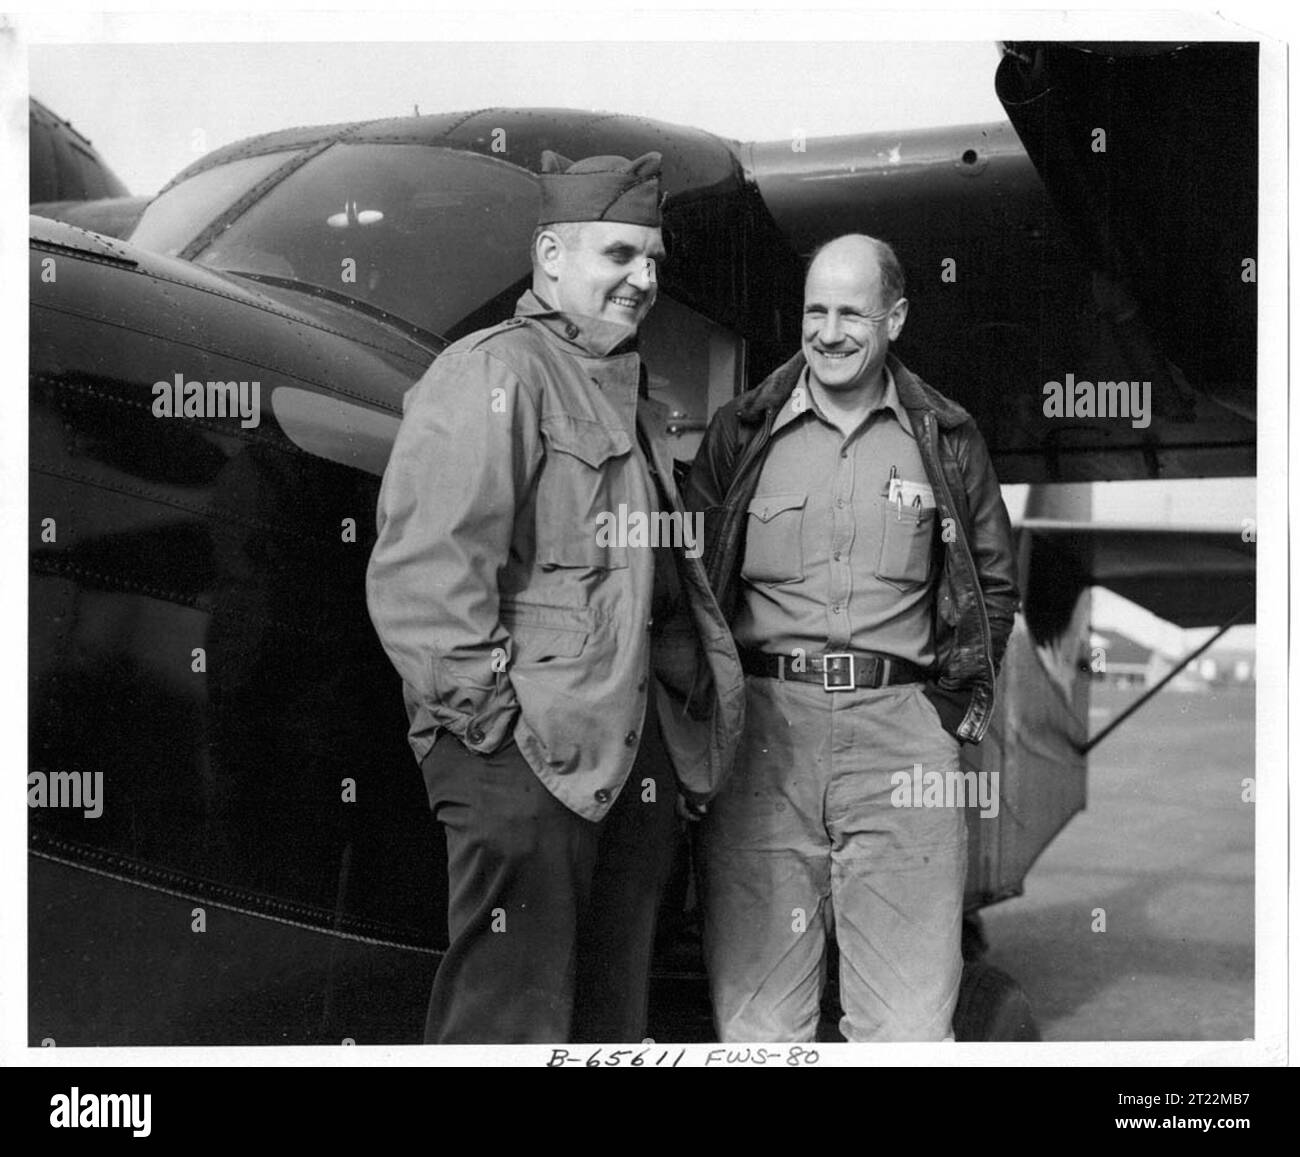 This photo was taken in 1950 on Amchitka Island, Alaska. 'L-R: Captain Floyd A. Puckett, C.O. of Air Force Base on Amchitka Island and John Ball, chief of Aircraft Operations for FWS.'. Subjects: Wildlife refuges; Alaska Maritime National Wildlife Refuge; Aleutians; Aircraft; Work of Service; Personnel; ARLIS; Alaska.  . 1998 - 2011. Stock Photo